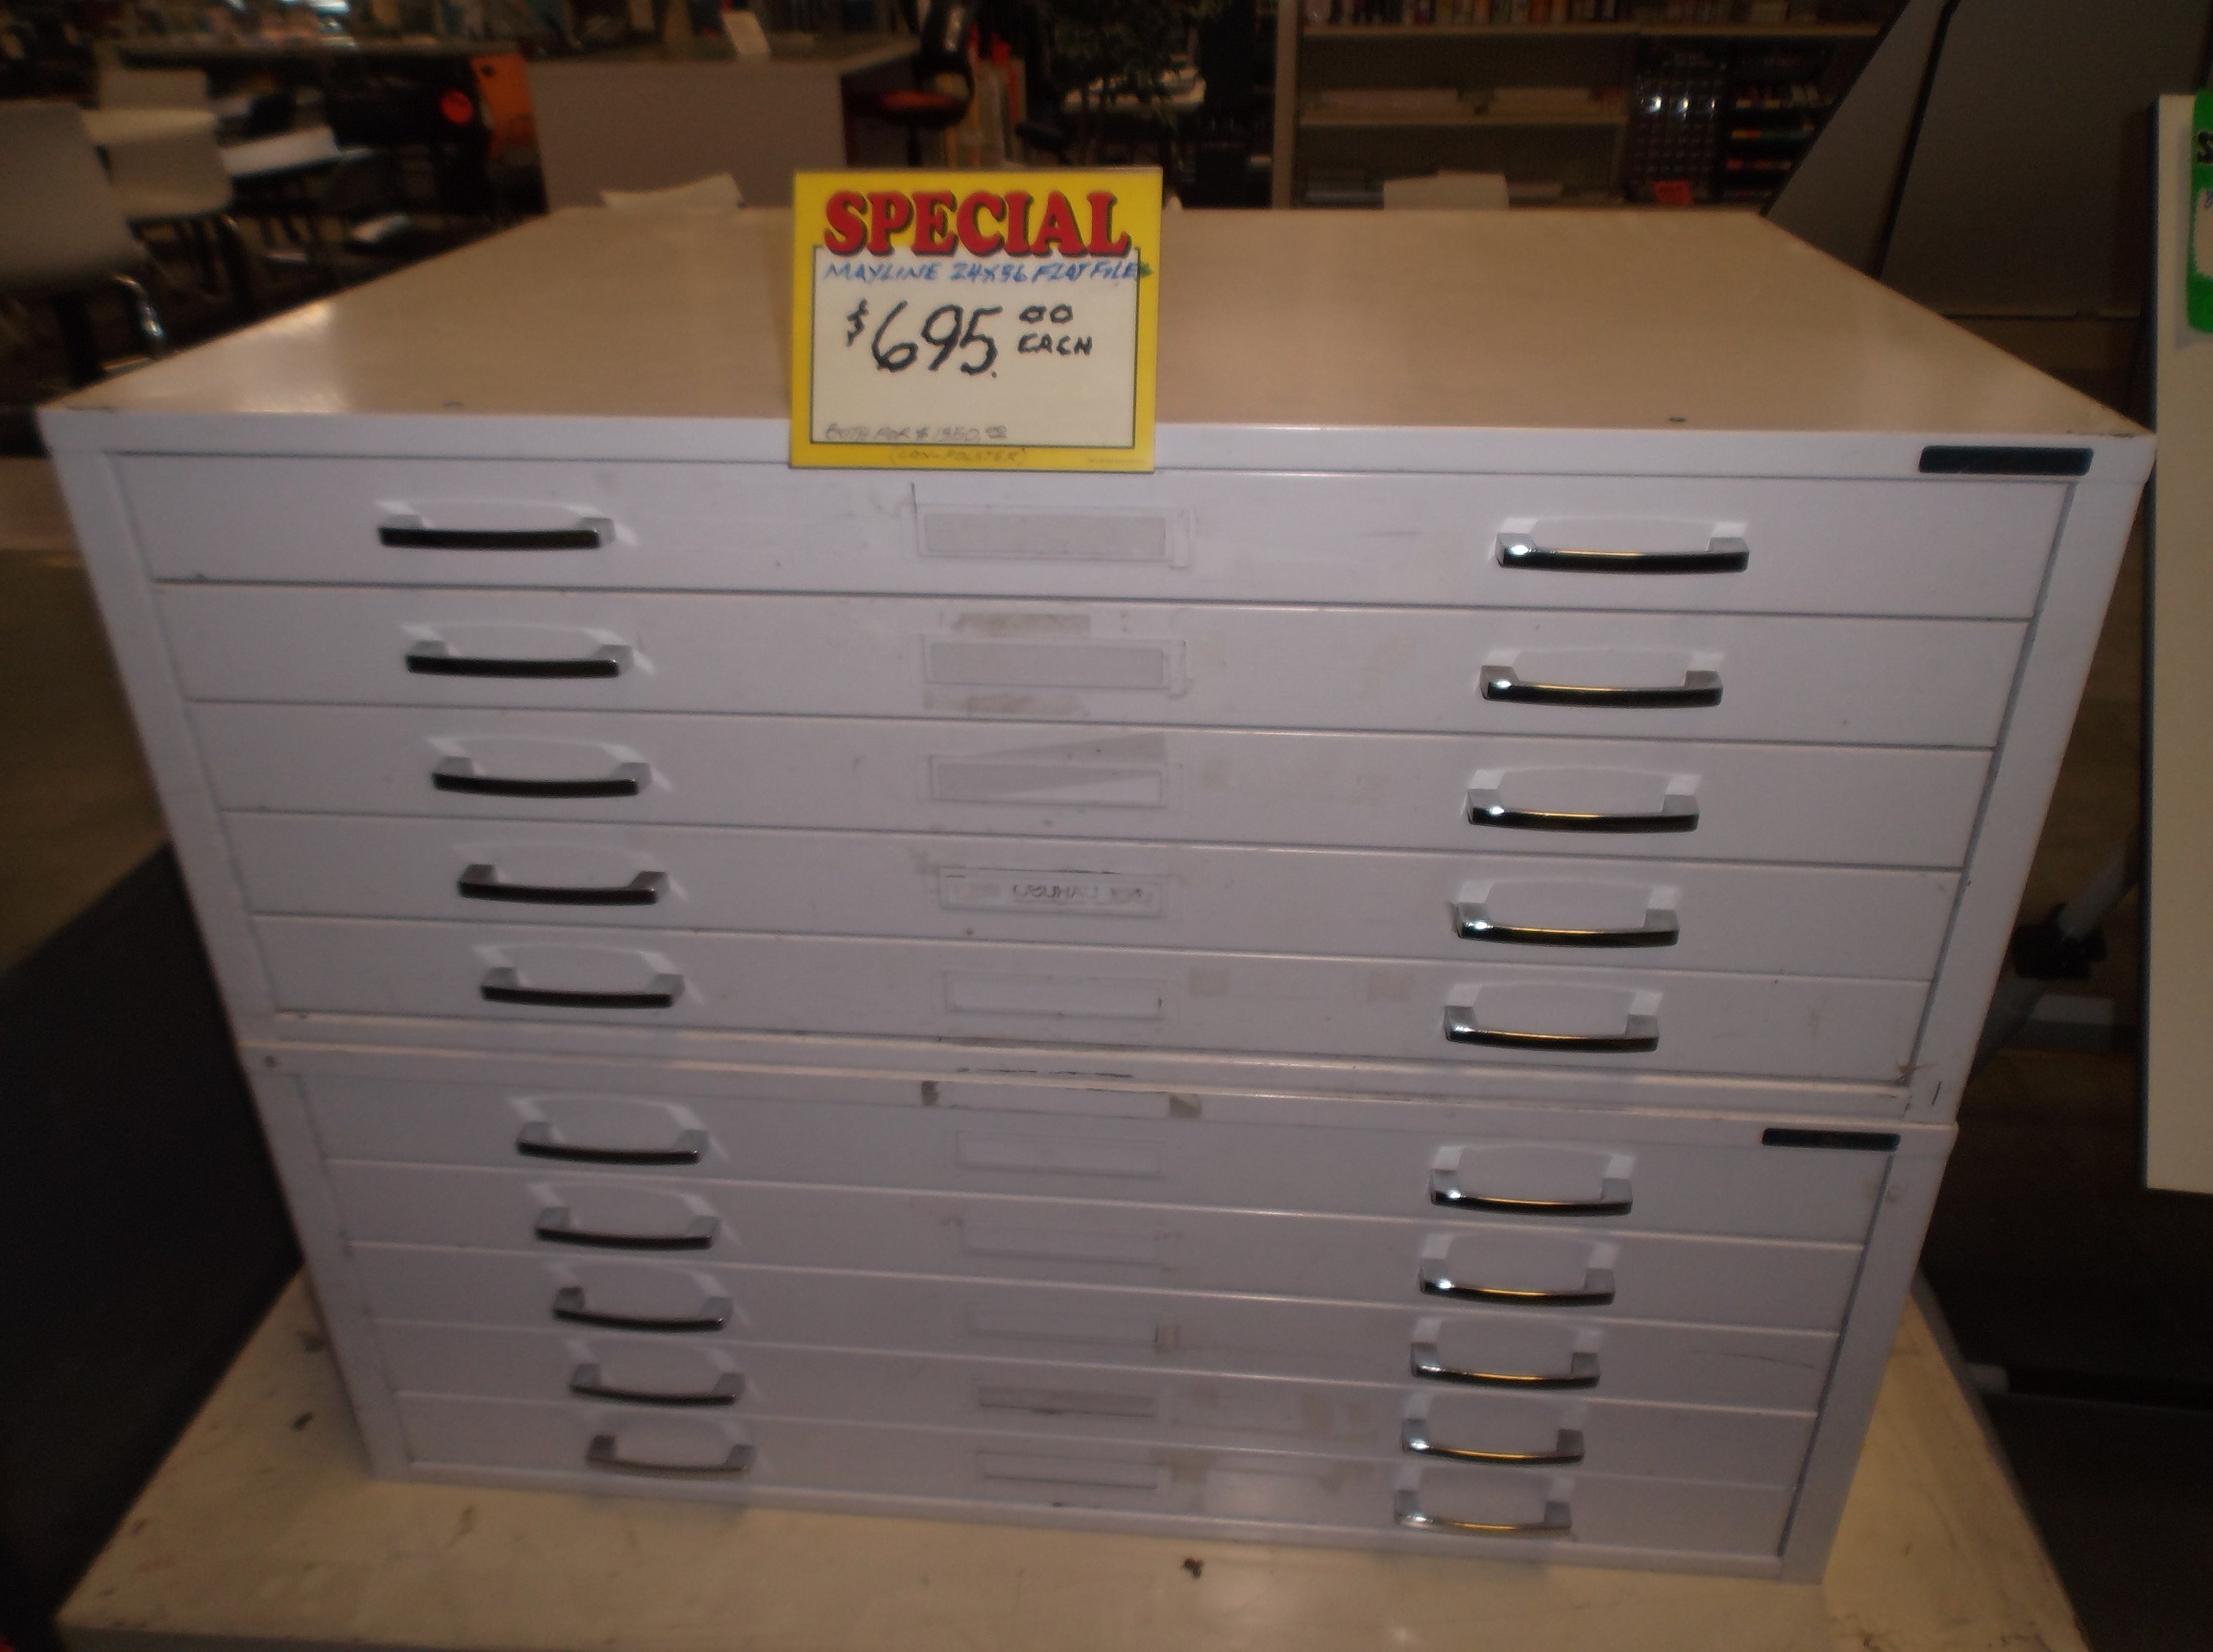 Safco 10-Drawer Steel Flat File for 30 x 42 Documents Black